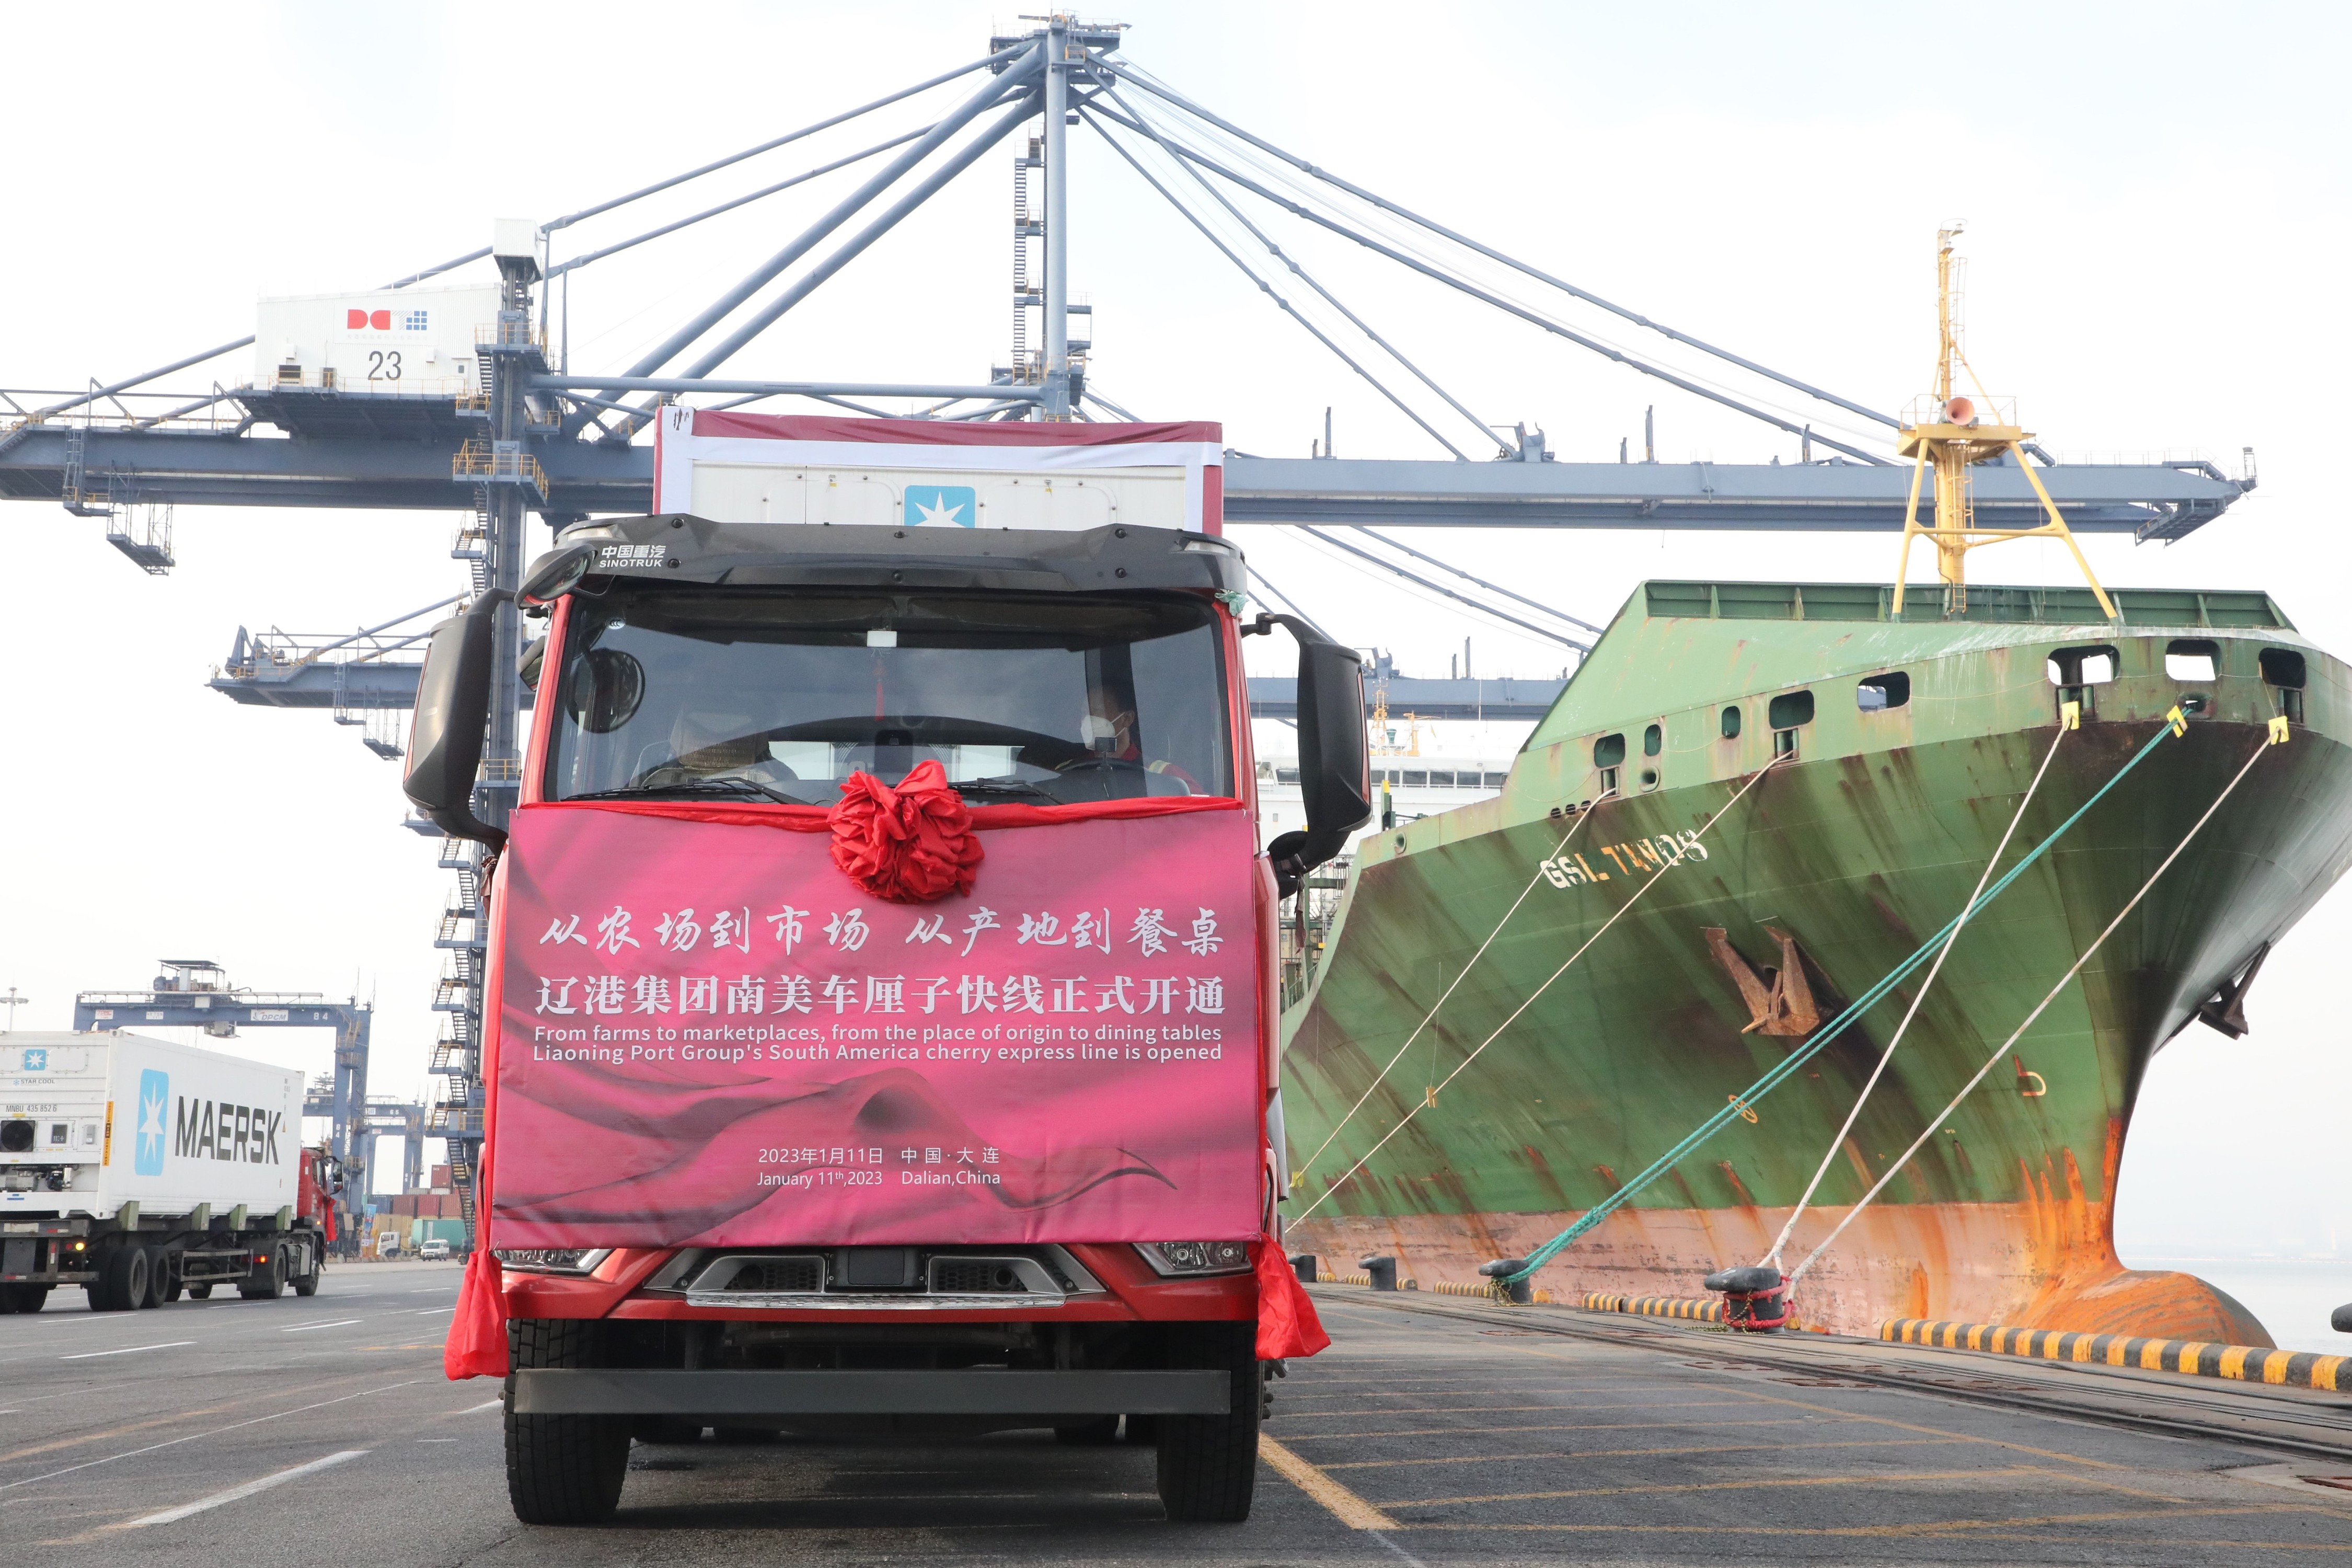 An express line for South American cherries run by Liaoning Port Group opens in northeast China's Liaoning Province, January 11, 2023. The new line will transport Chilean cherries directly to Dalian port, providing for customers in northeast Asia. /CFP